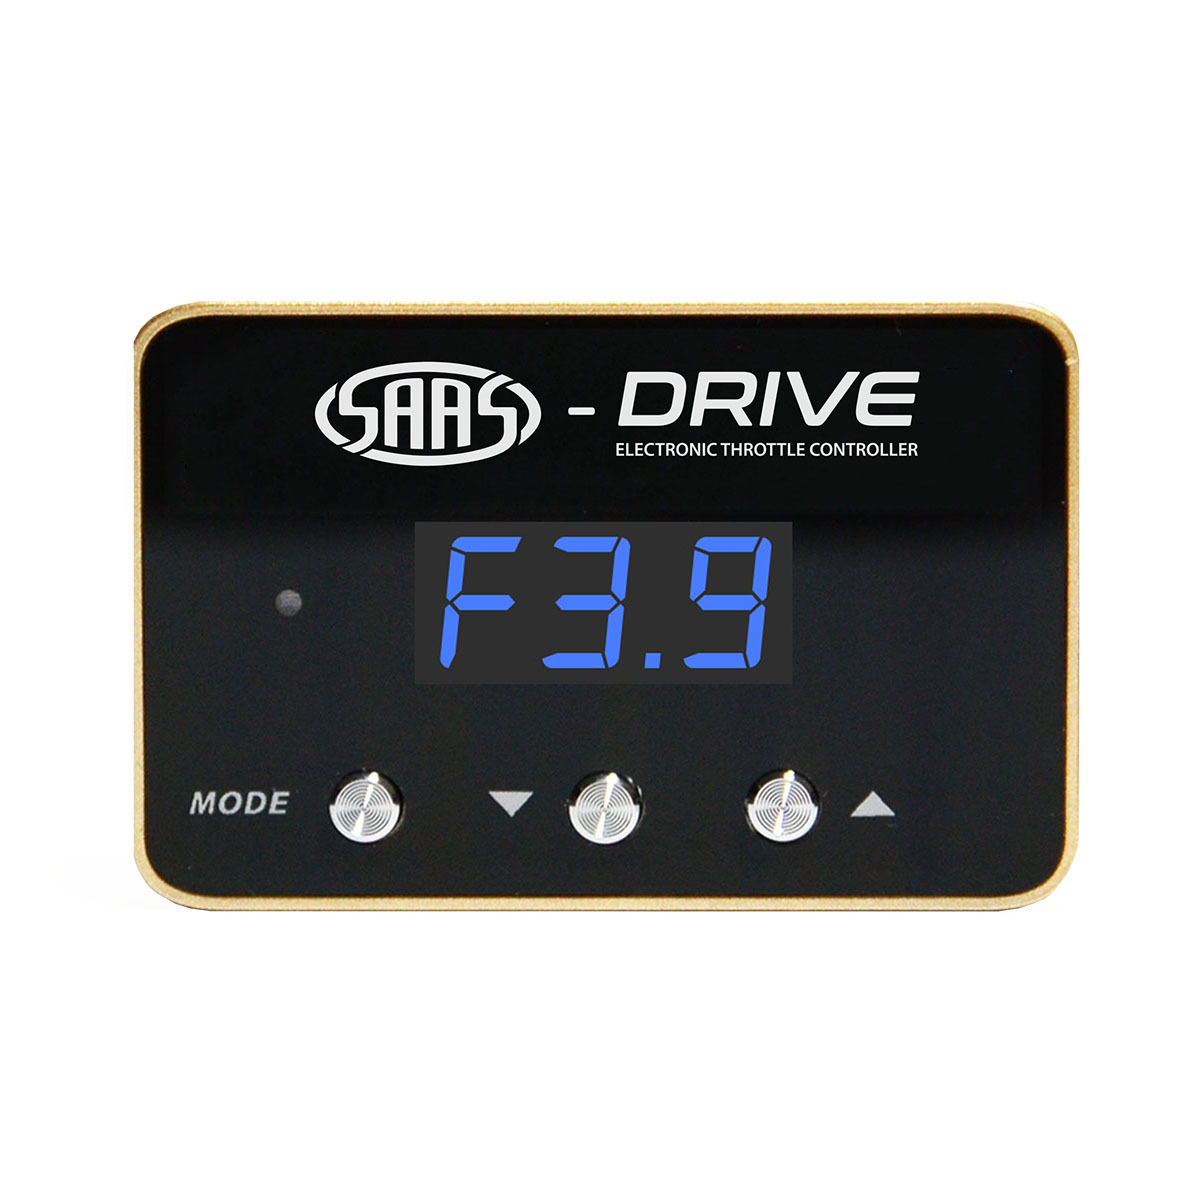 SAAS-Drive Holden Commodore VF 2013 - 2017 Throttle Controller 